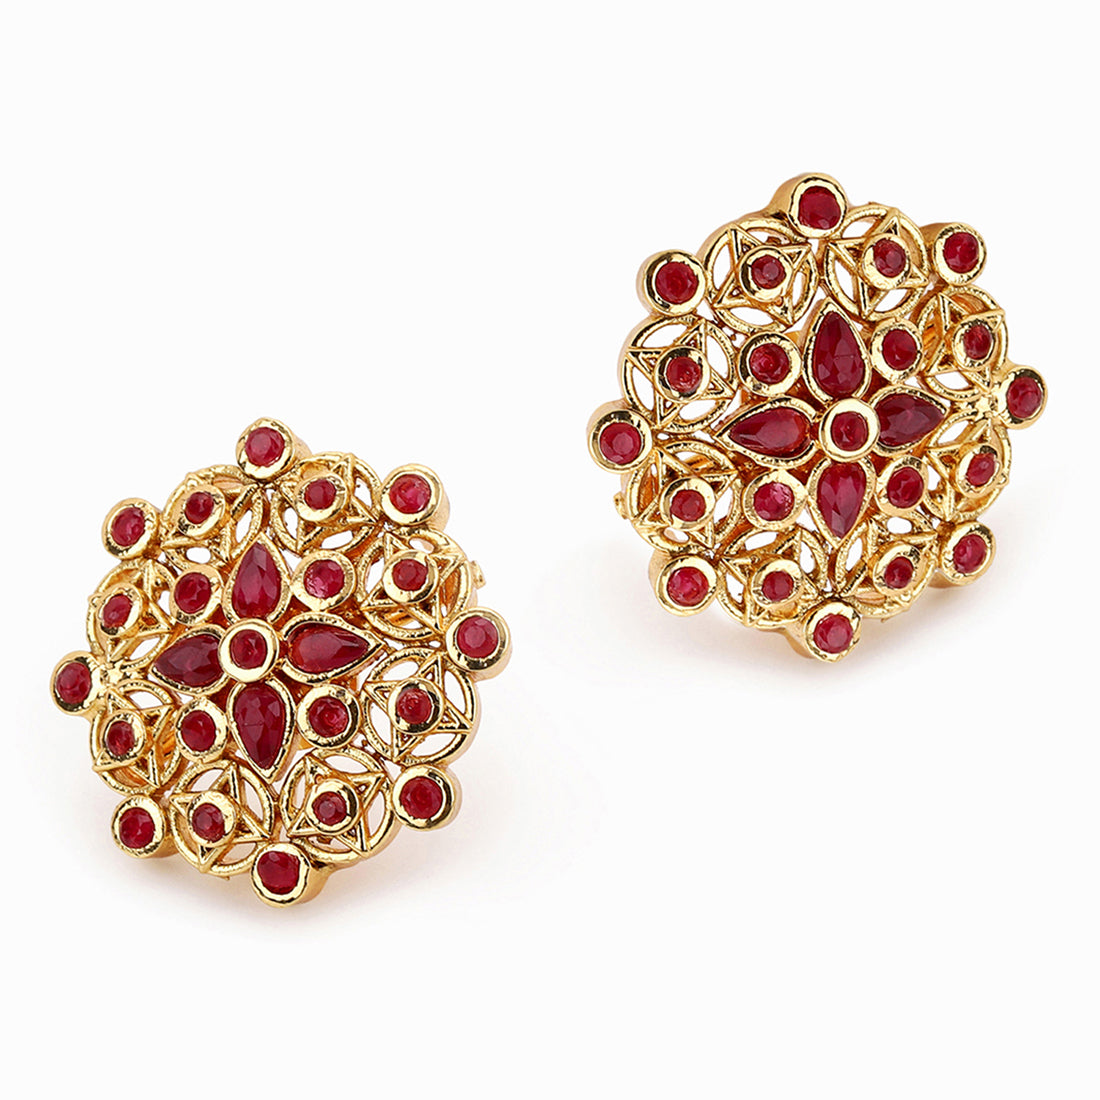 Gold Plated Round Shape Stud Earrings with Red Stone